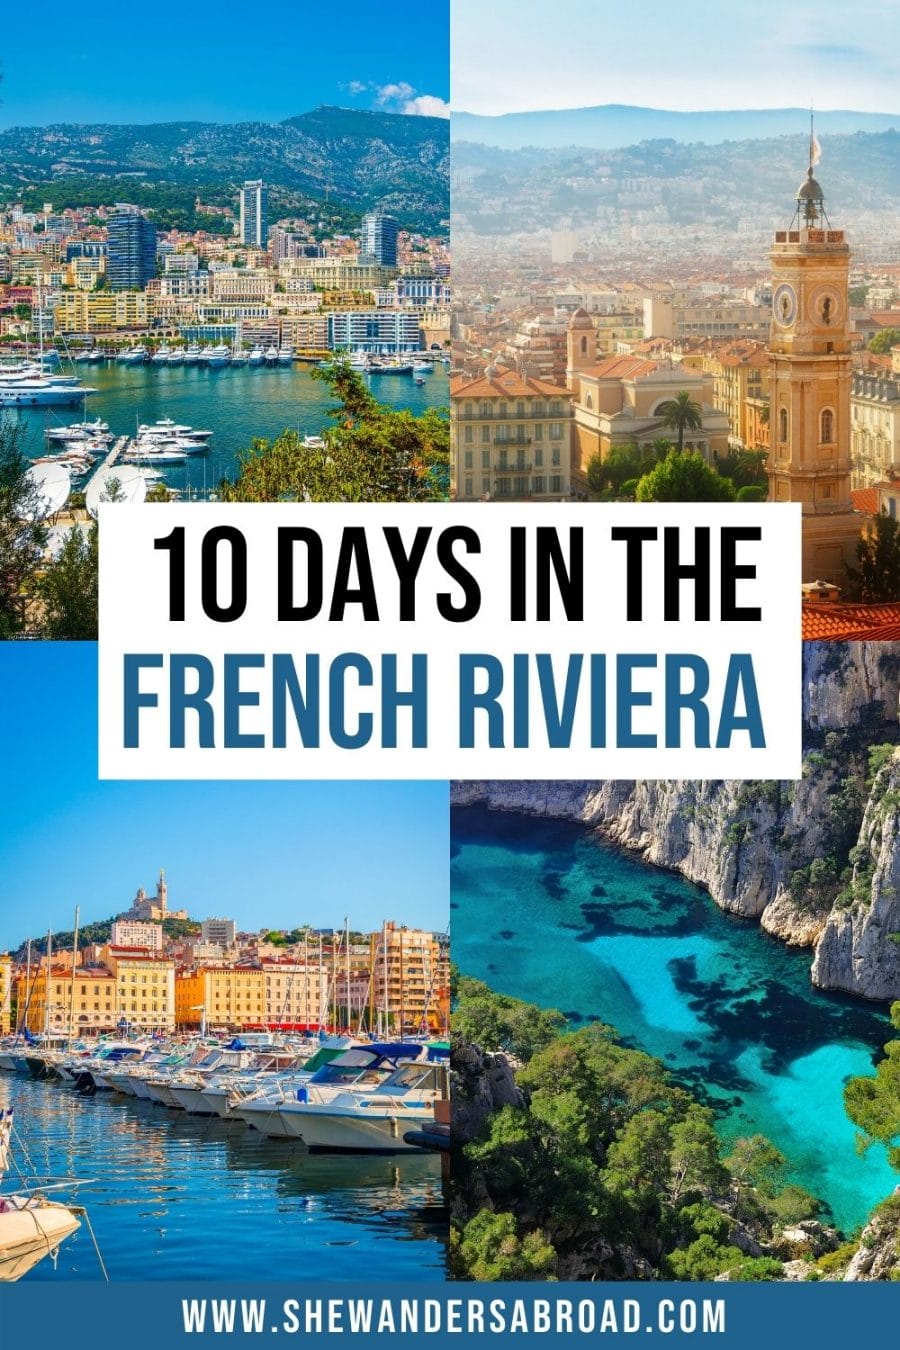 The Ultimate French Riviera Road Trip Itinerary for 10 Days